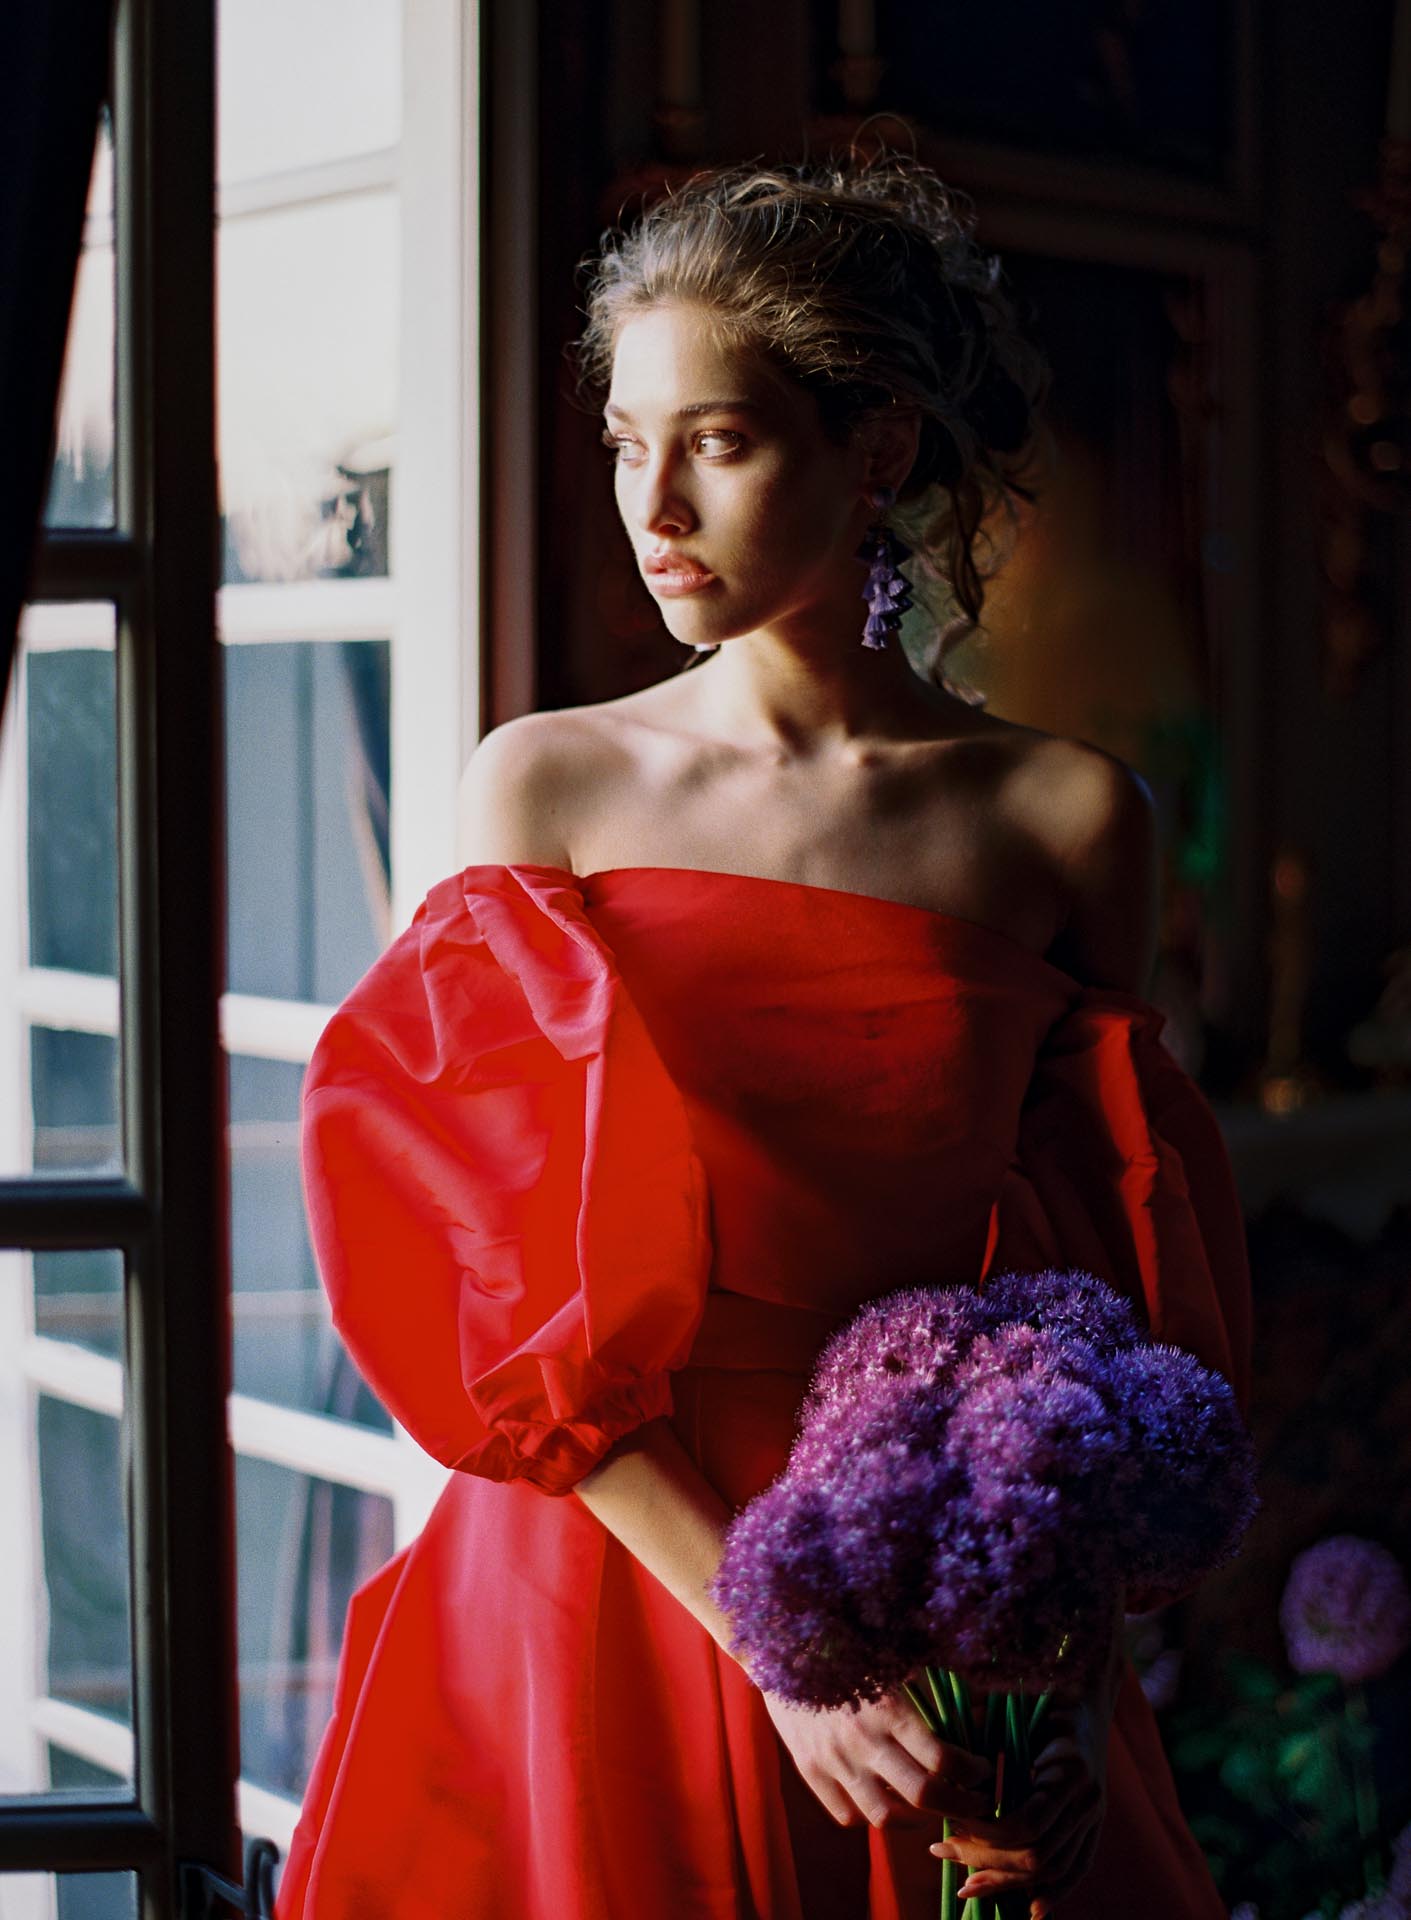 chateau de villette fashion inspiration styled shoot editorial french chateau rental red gown bride ideas